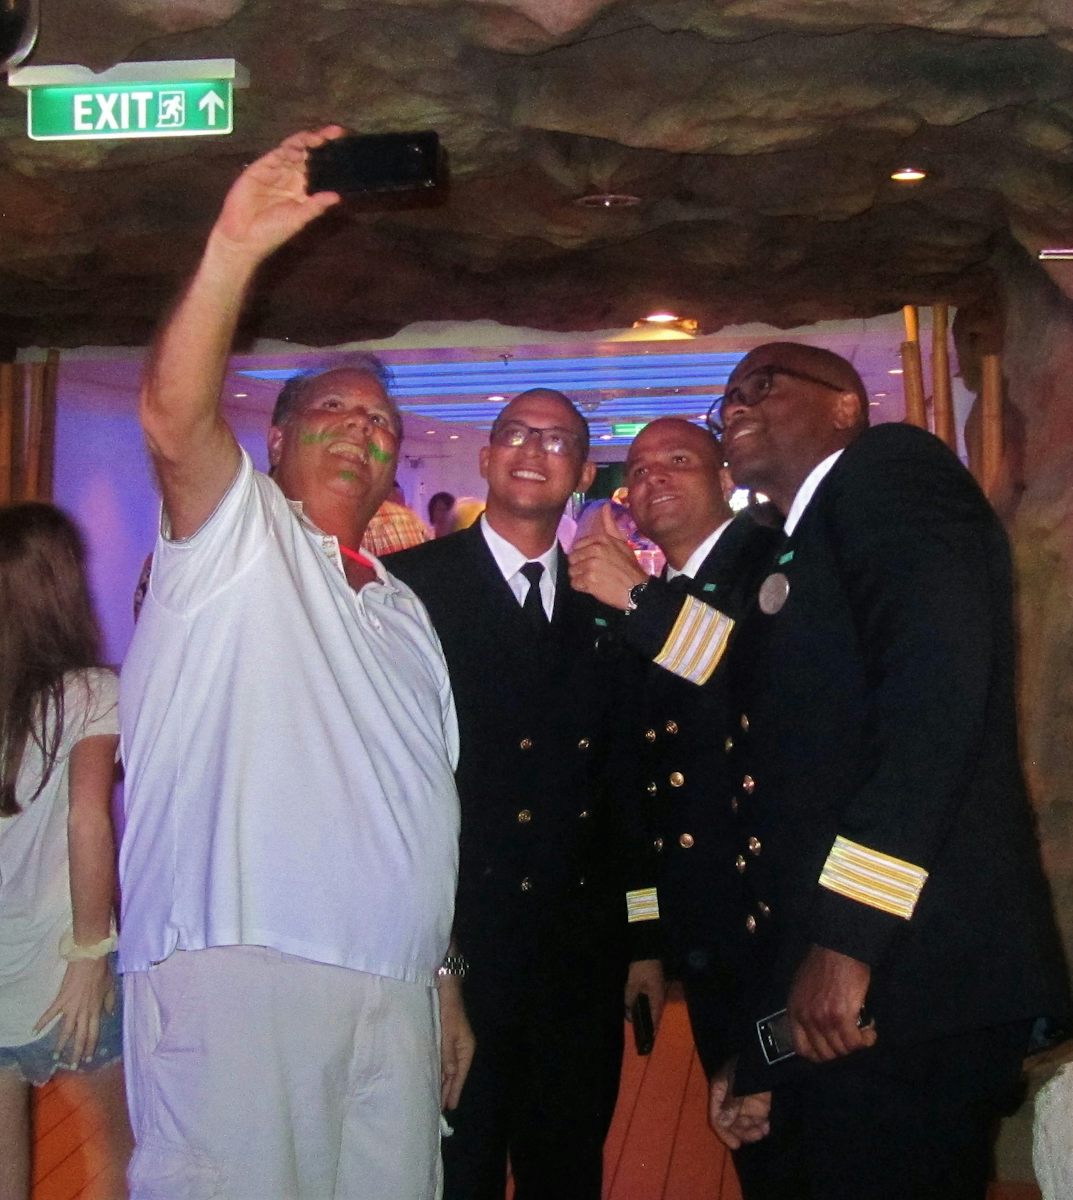 GLOW party with the Captain and officers